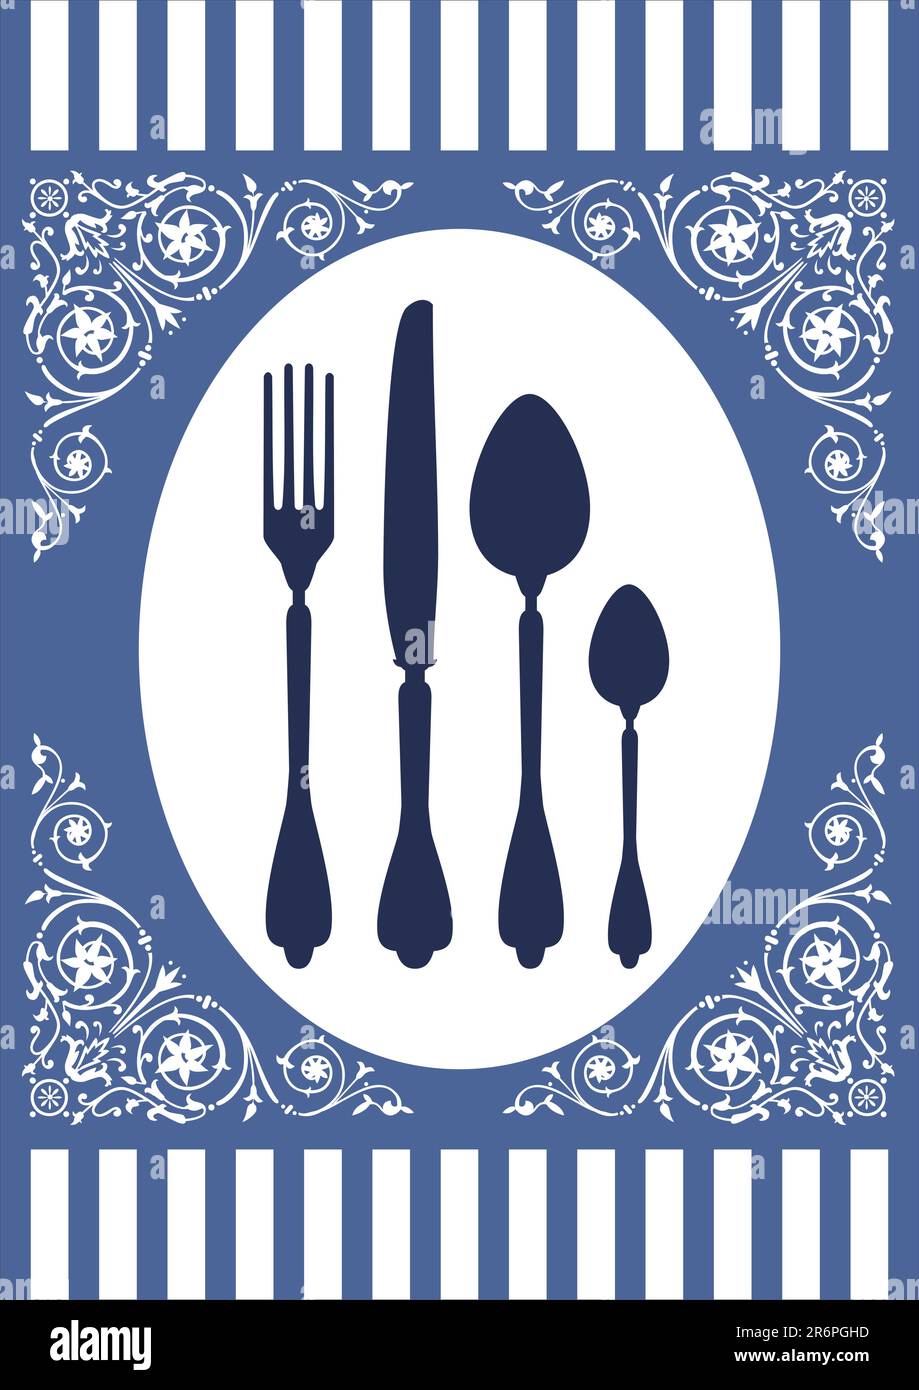 Place setting with fork, spoon and knife and ornaments. Design for food or restaurant menu card on a blue background. Full scalable vector graphic Stock Vector